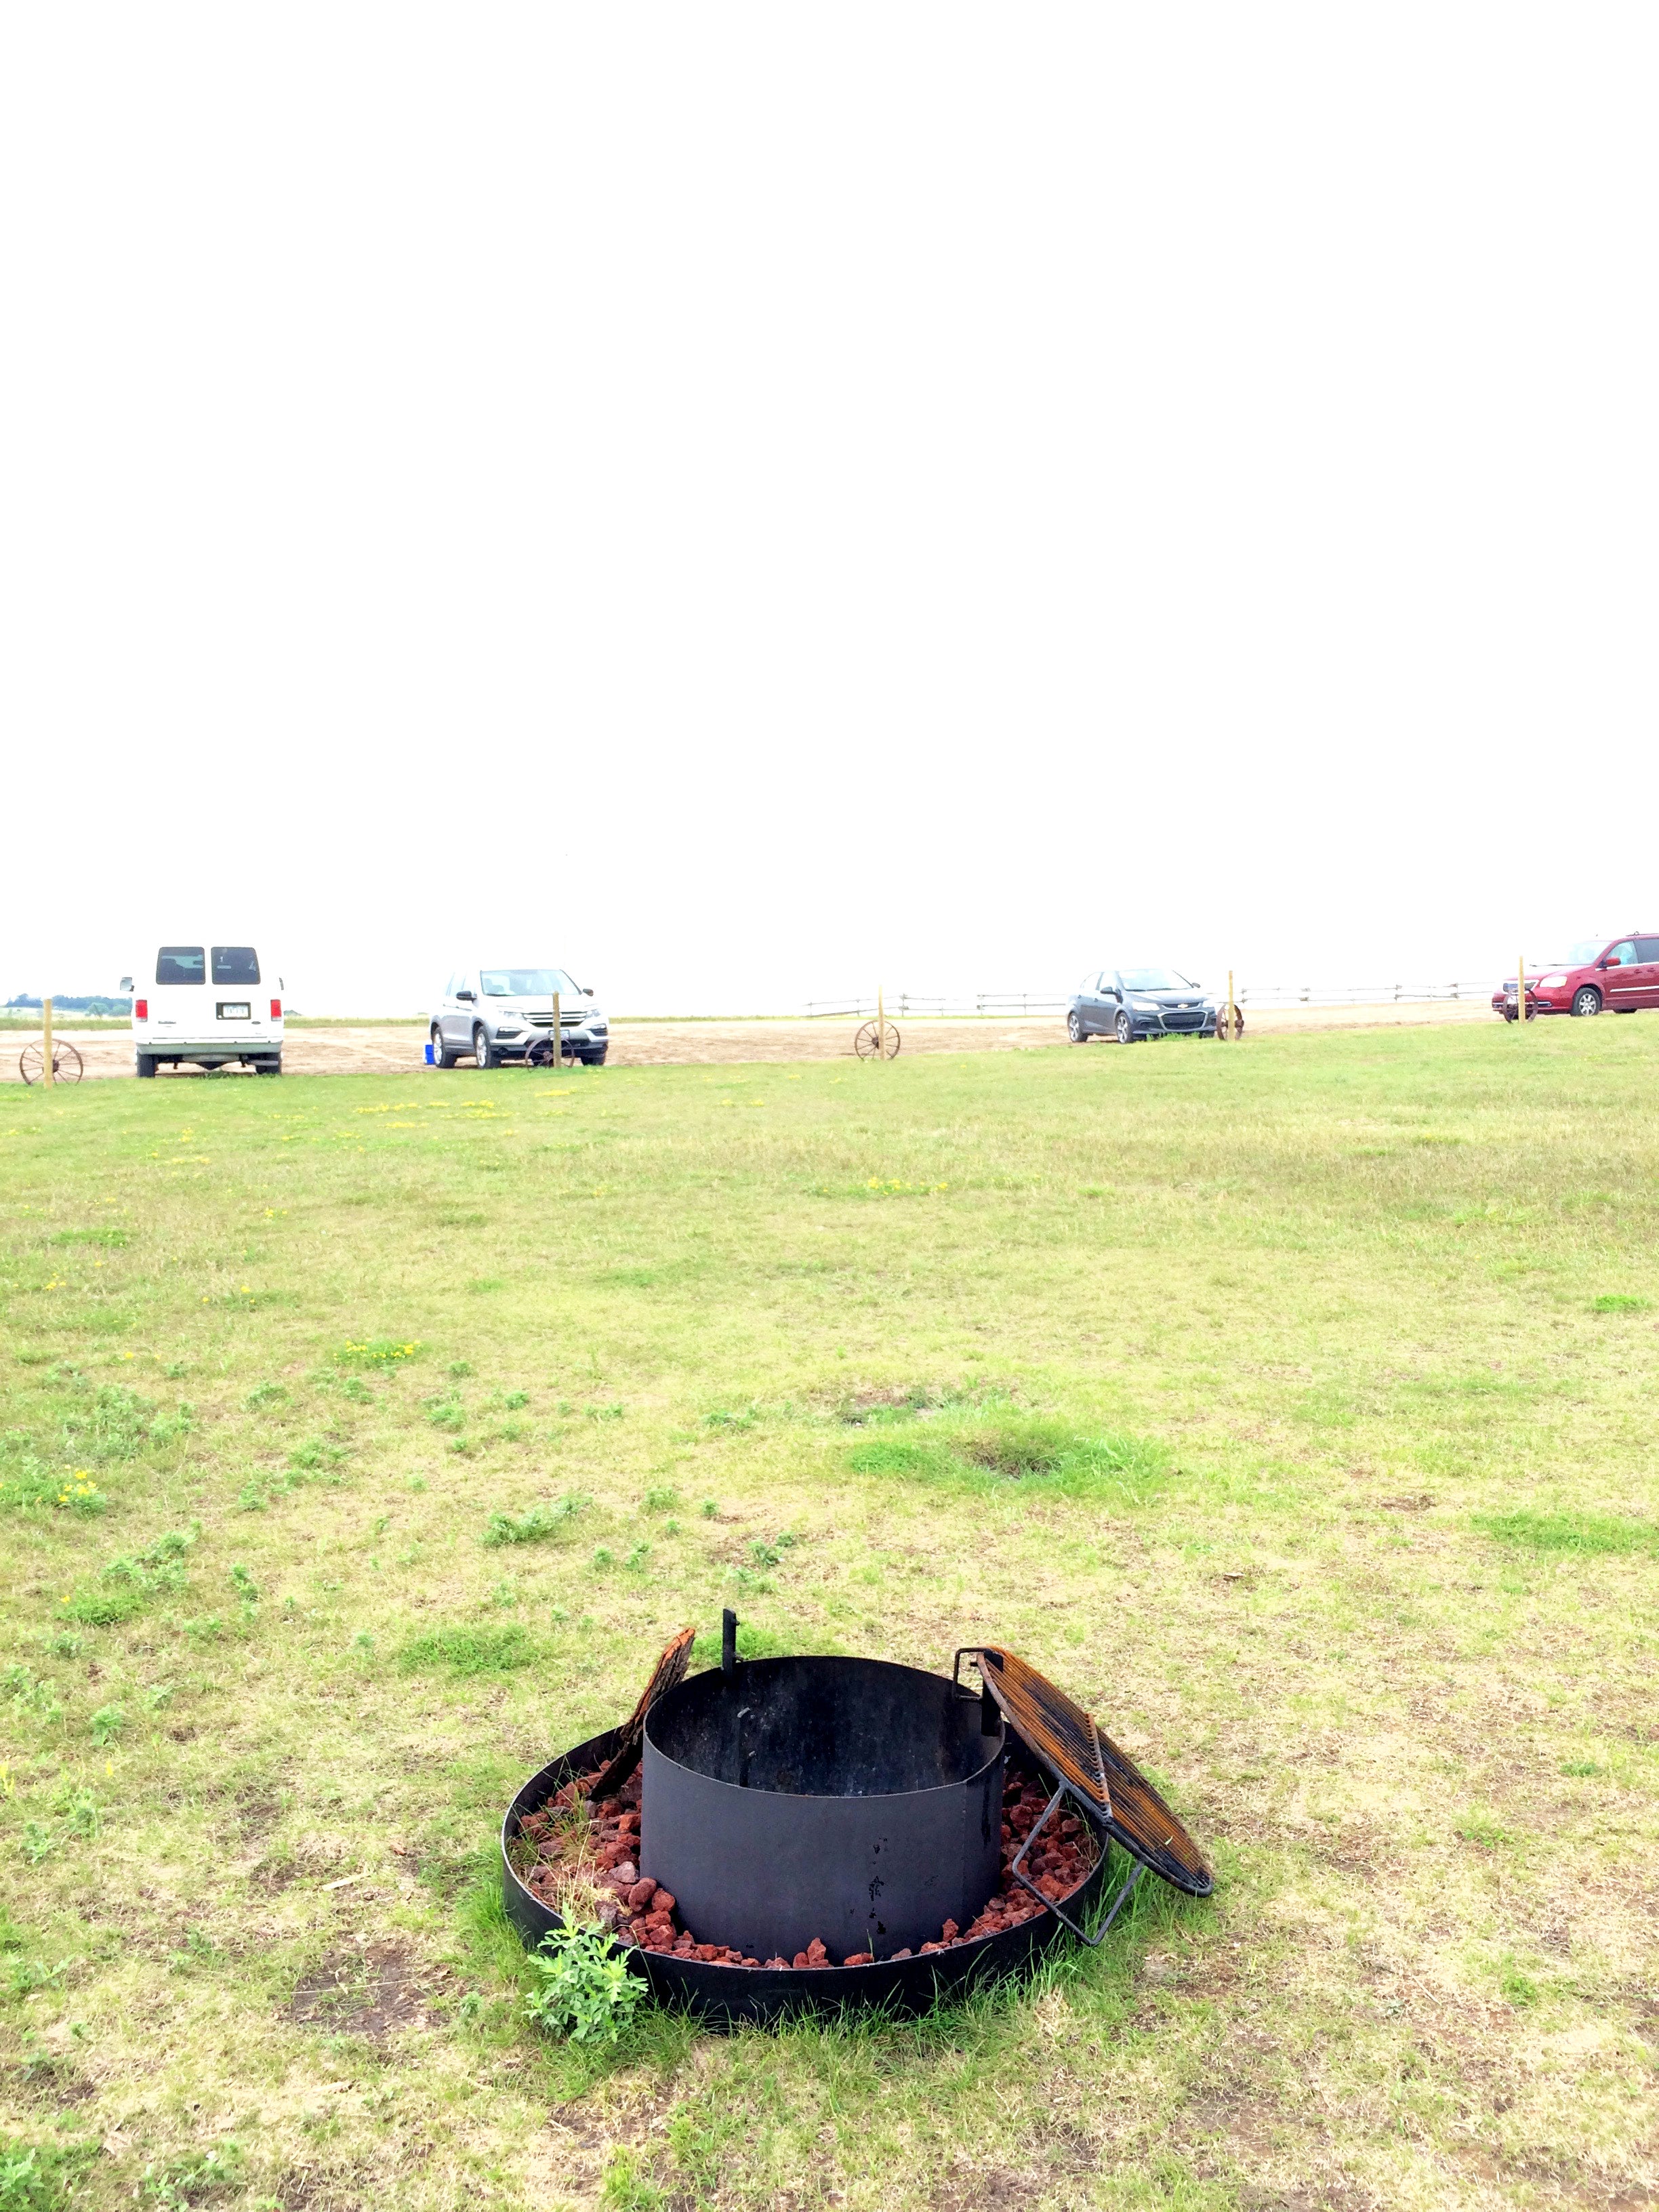 Fire pit in the tent field.